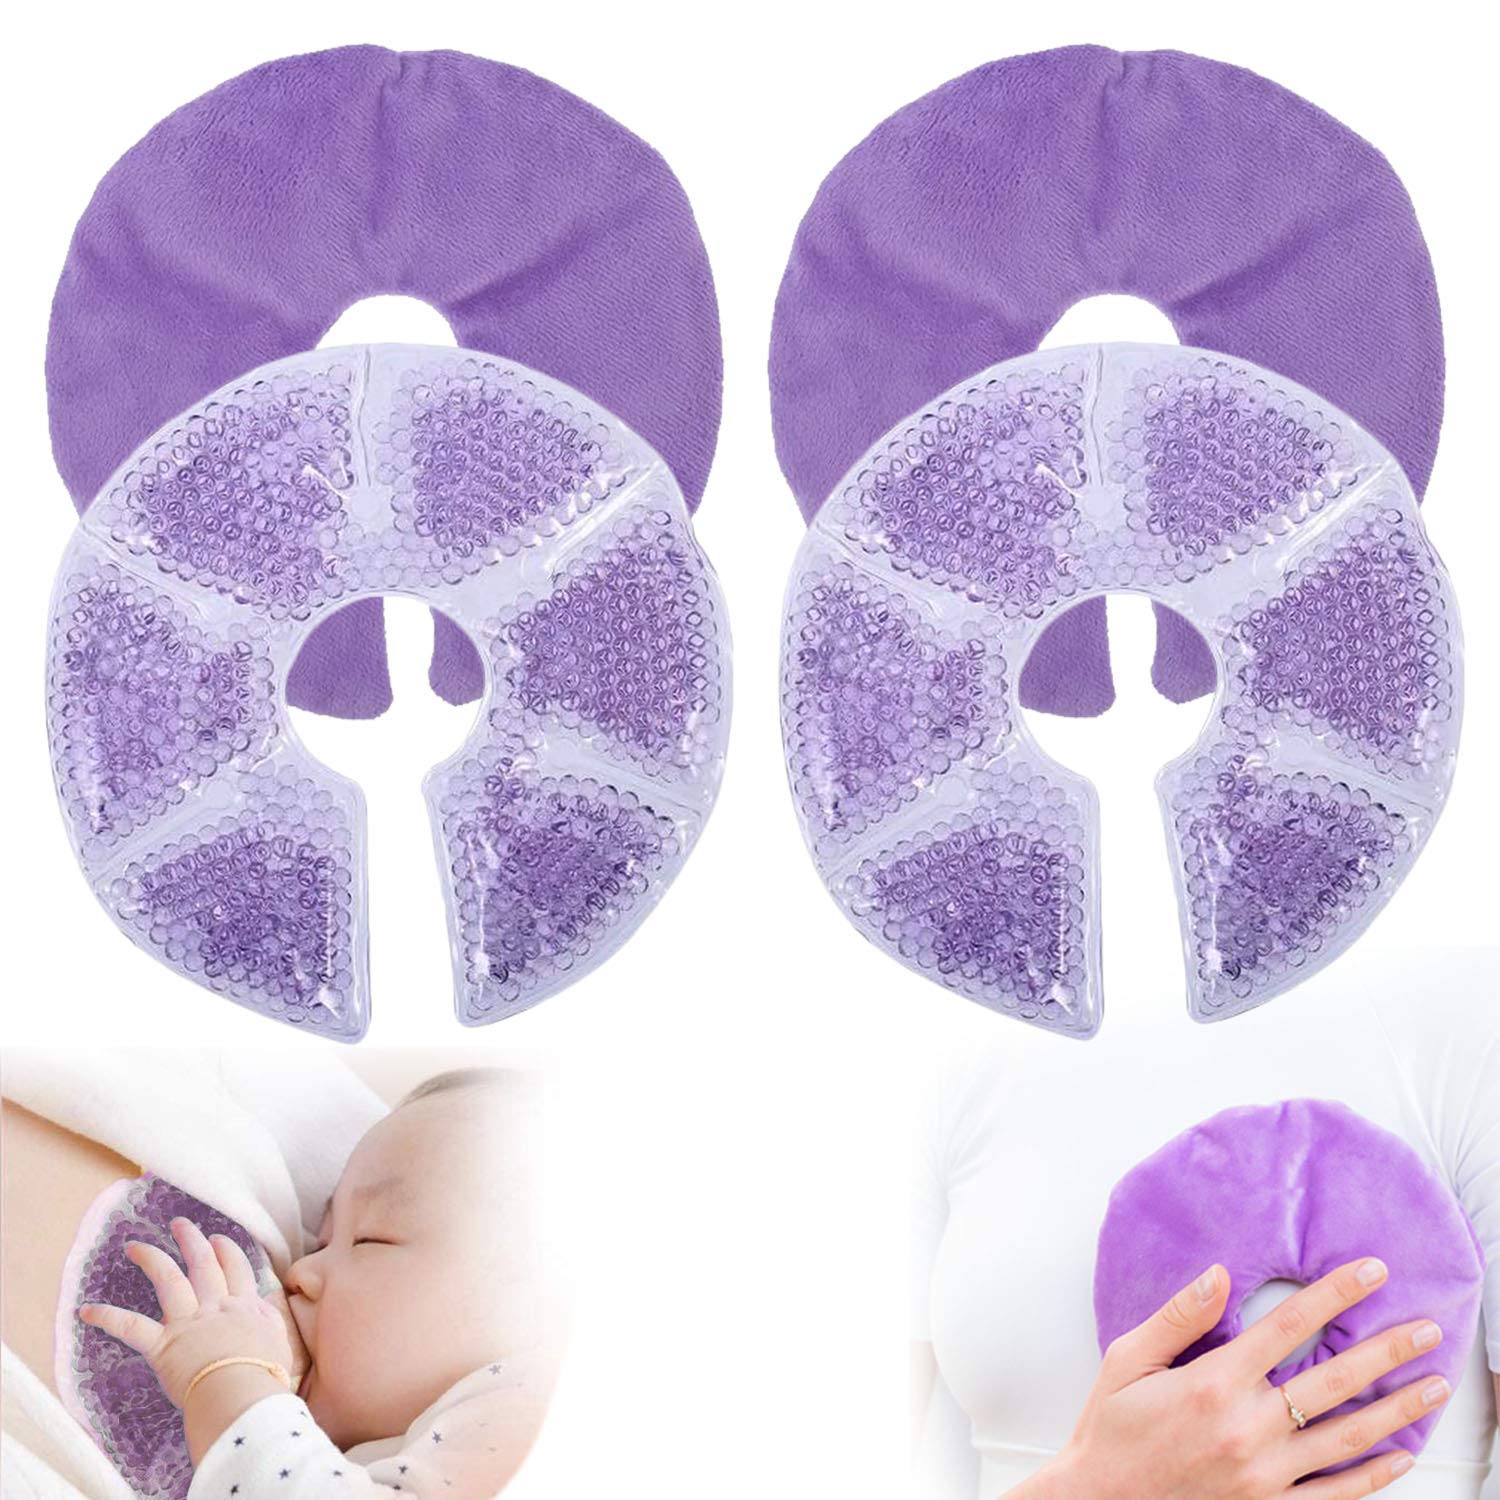 Breast Therapy Pads for Breastfeeding - Essential Heated Relief for Clogged  Milk Ducts - Breast Ice Packs to Reduce Engorgement Swelling - Reusable